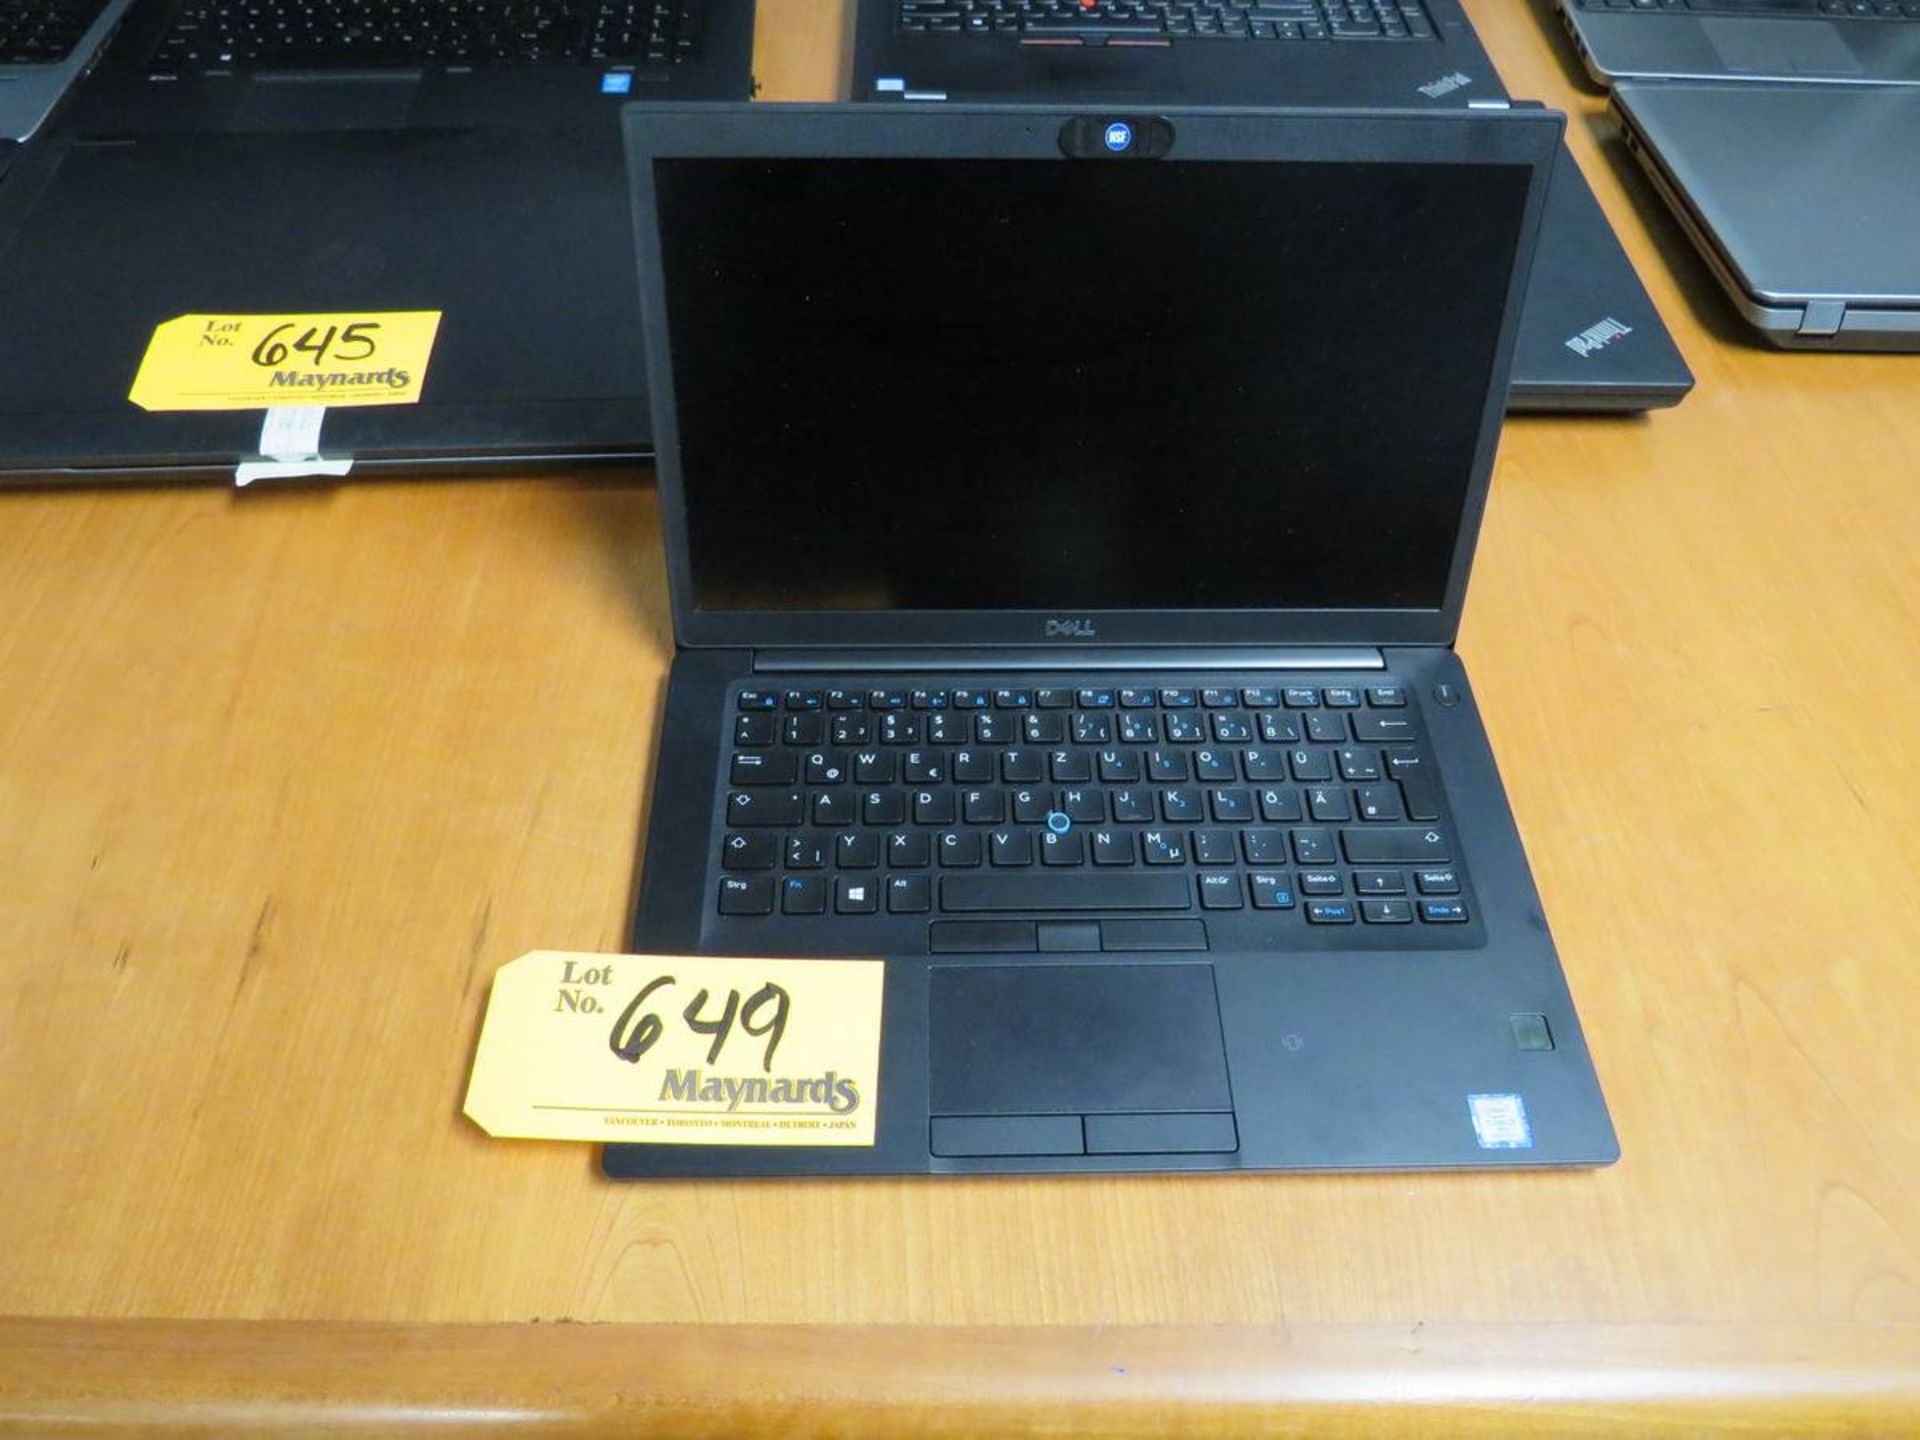 Dell Laptop Computer